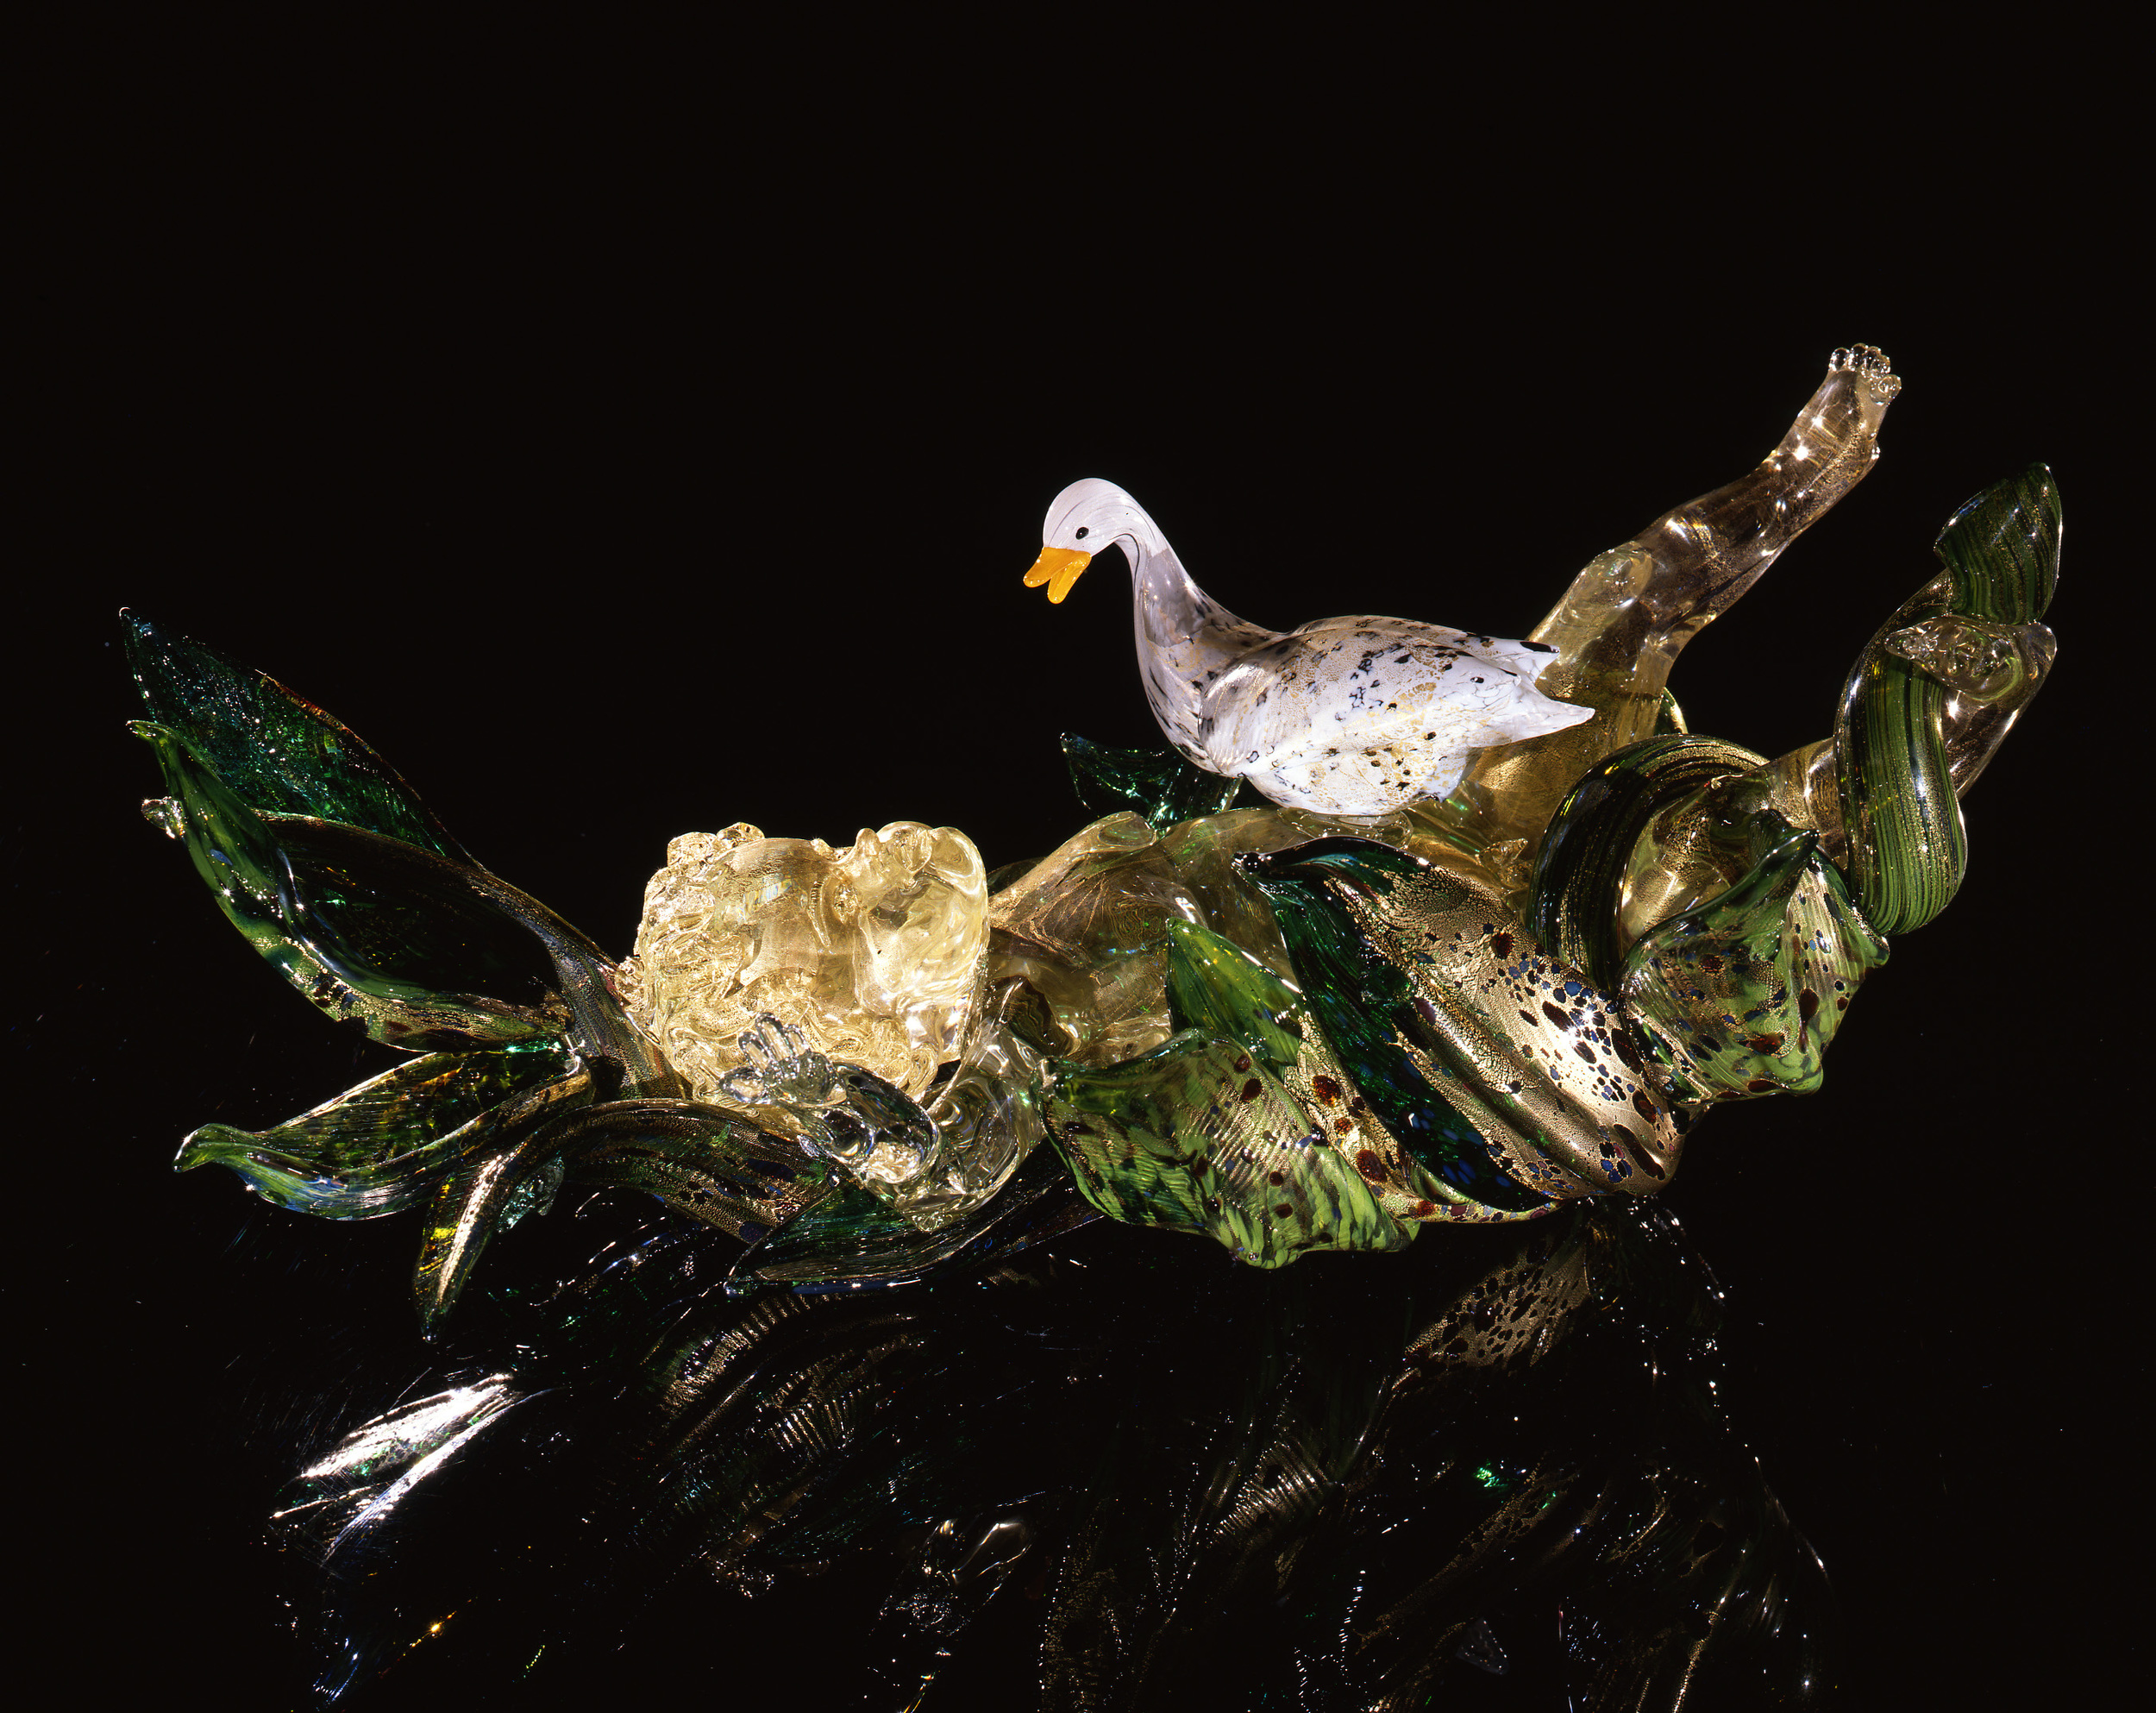  Dale Chihuly,&nbsp; Gilded Putti in Leaves with Swan&nbsp; (1991, glass, 11 x 24 x 12 inches) 